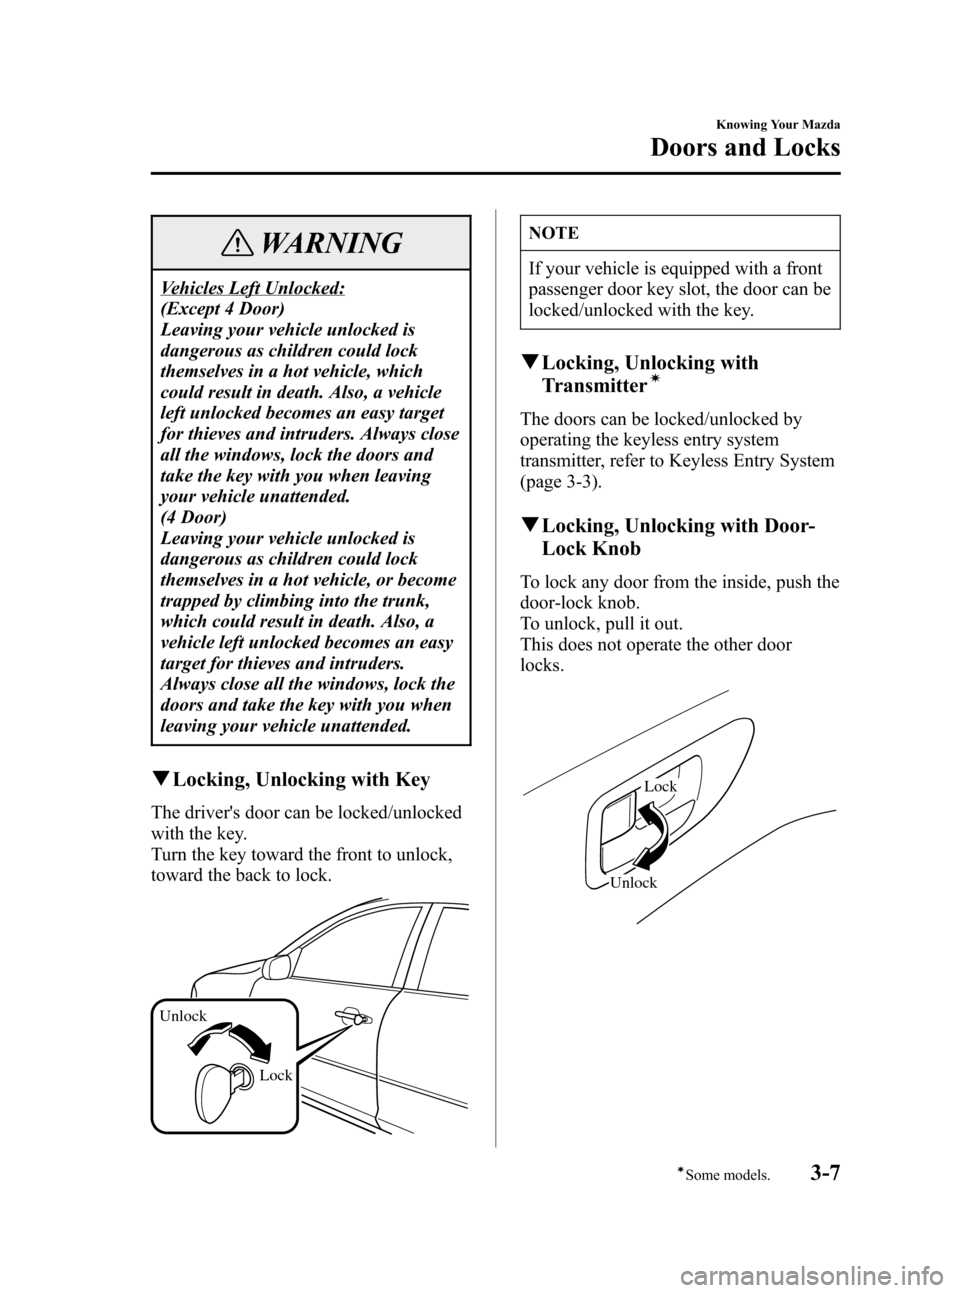 MAZDA MODEL 3 HATCHBACK 2006   (in English) Manual PDF Black plate (77,1)
WARNING
Vehicles Left Unlocked:
(Except 4 Door)
Leaving your vehicle unlocked is
dangerous as children could lock
themselves in a hot vehicle, which
could result in death. Also, a v